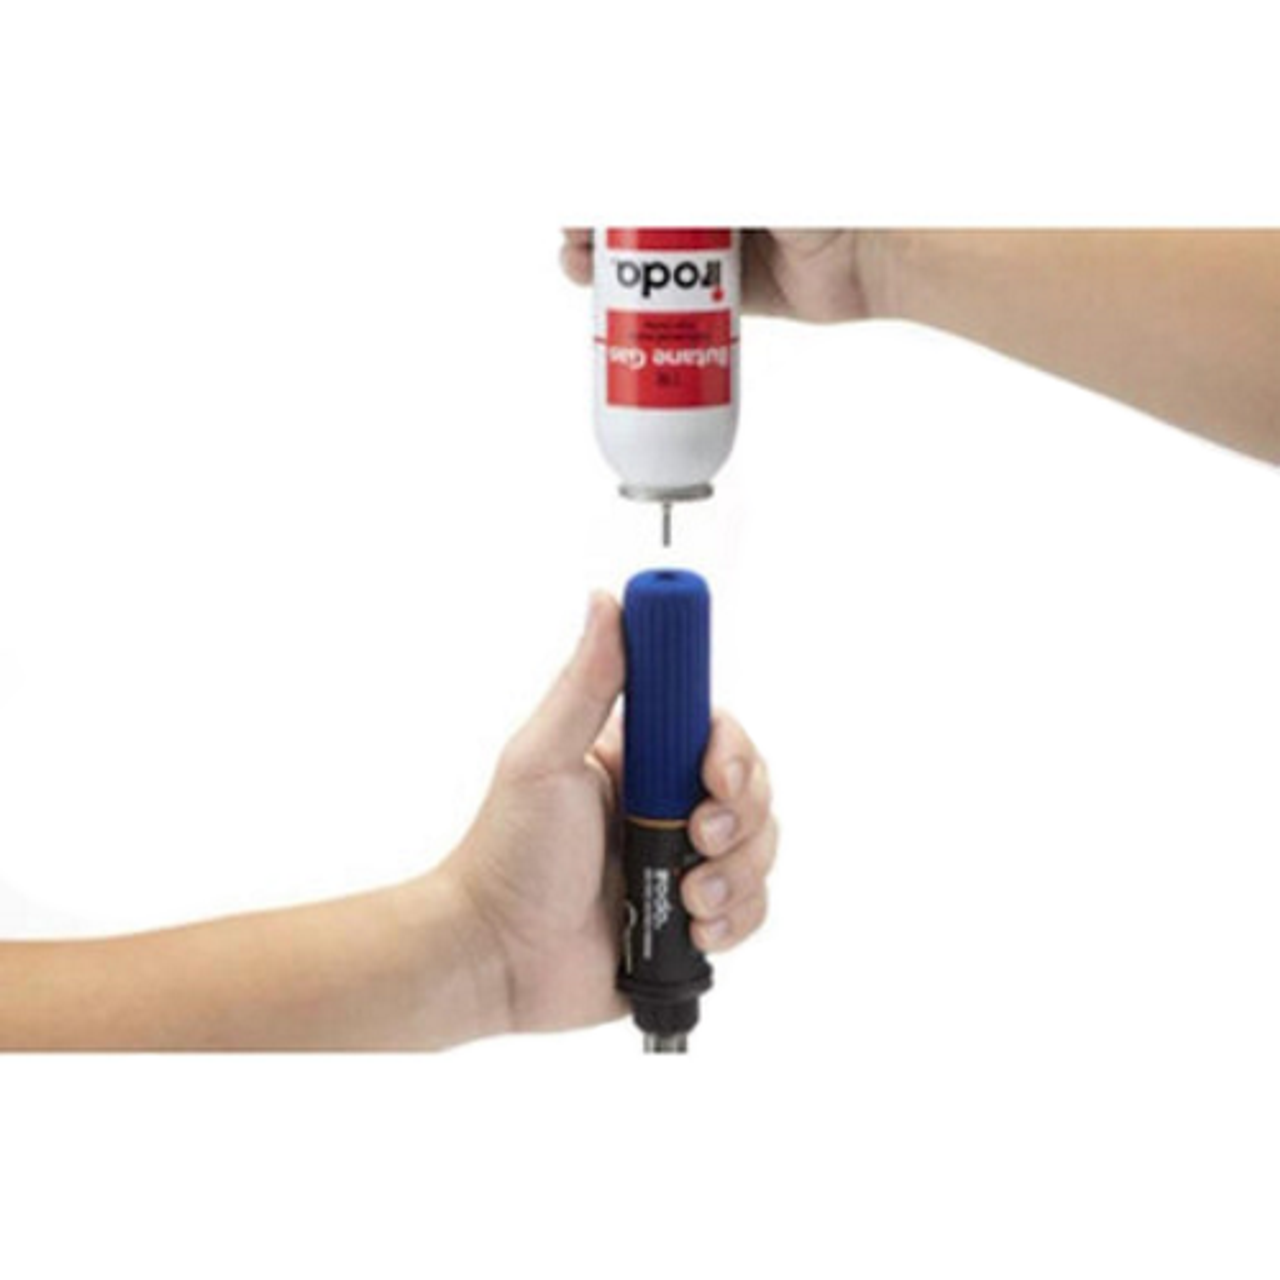 Easily refillable with and standard butane can!